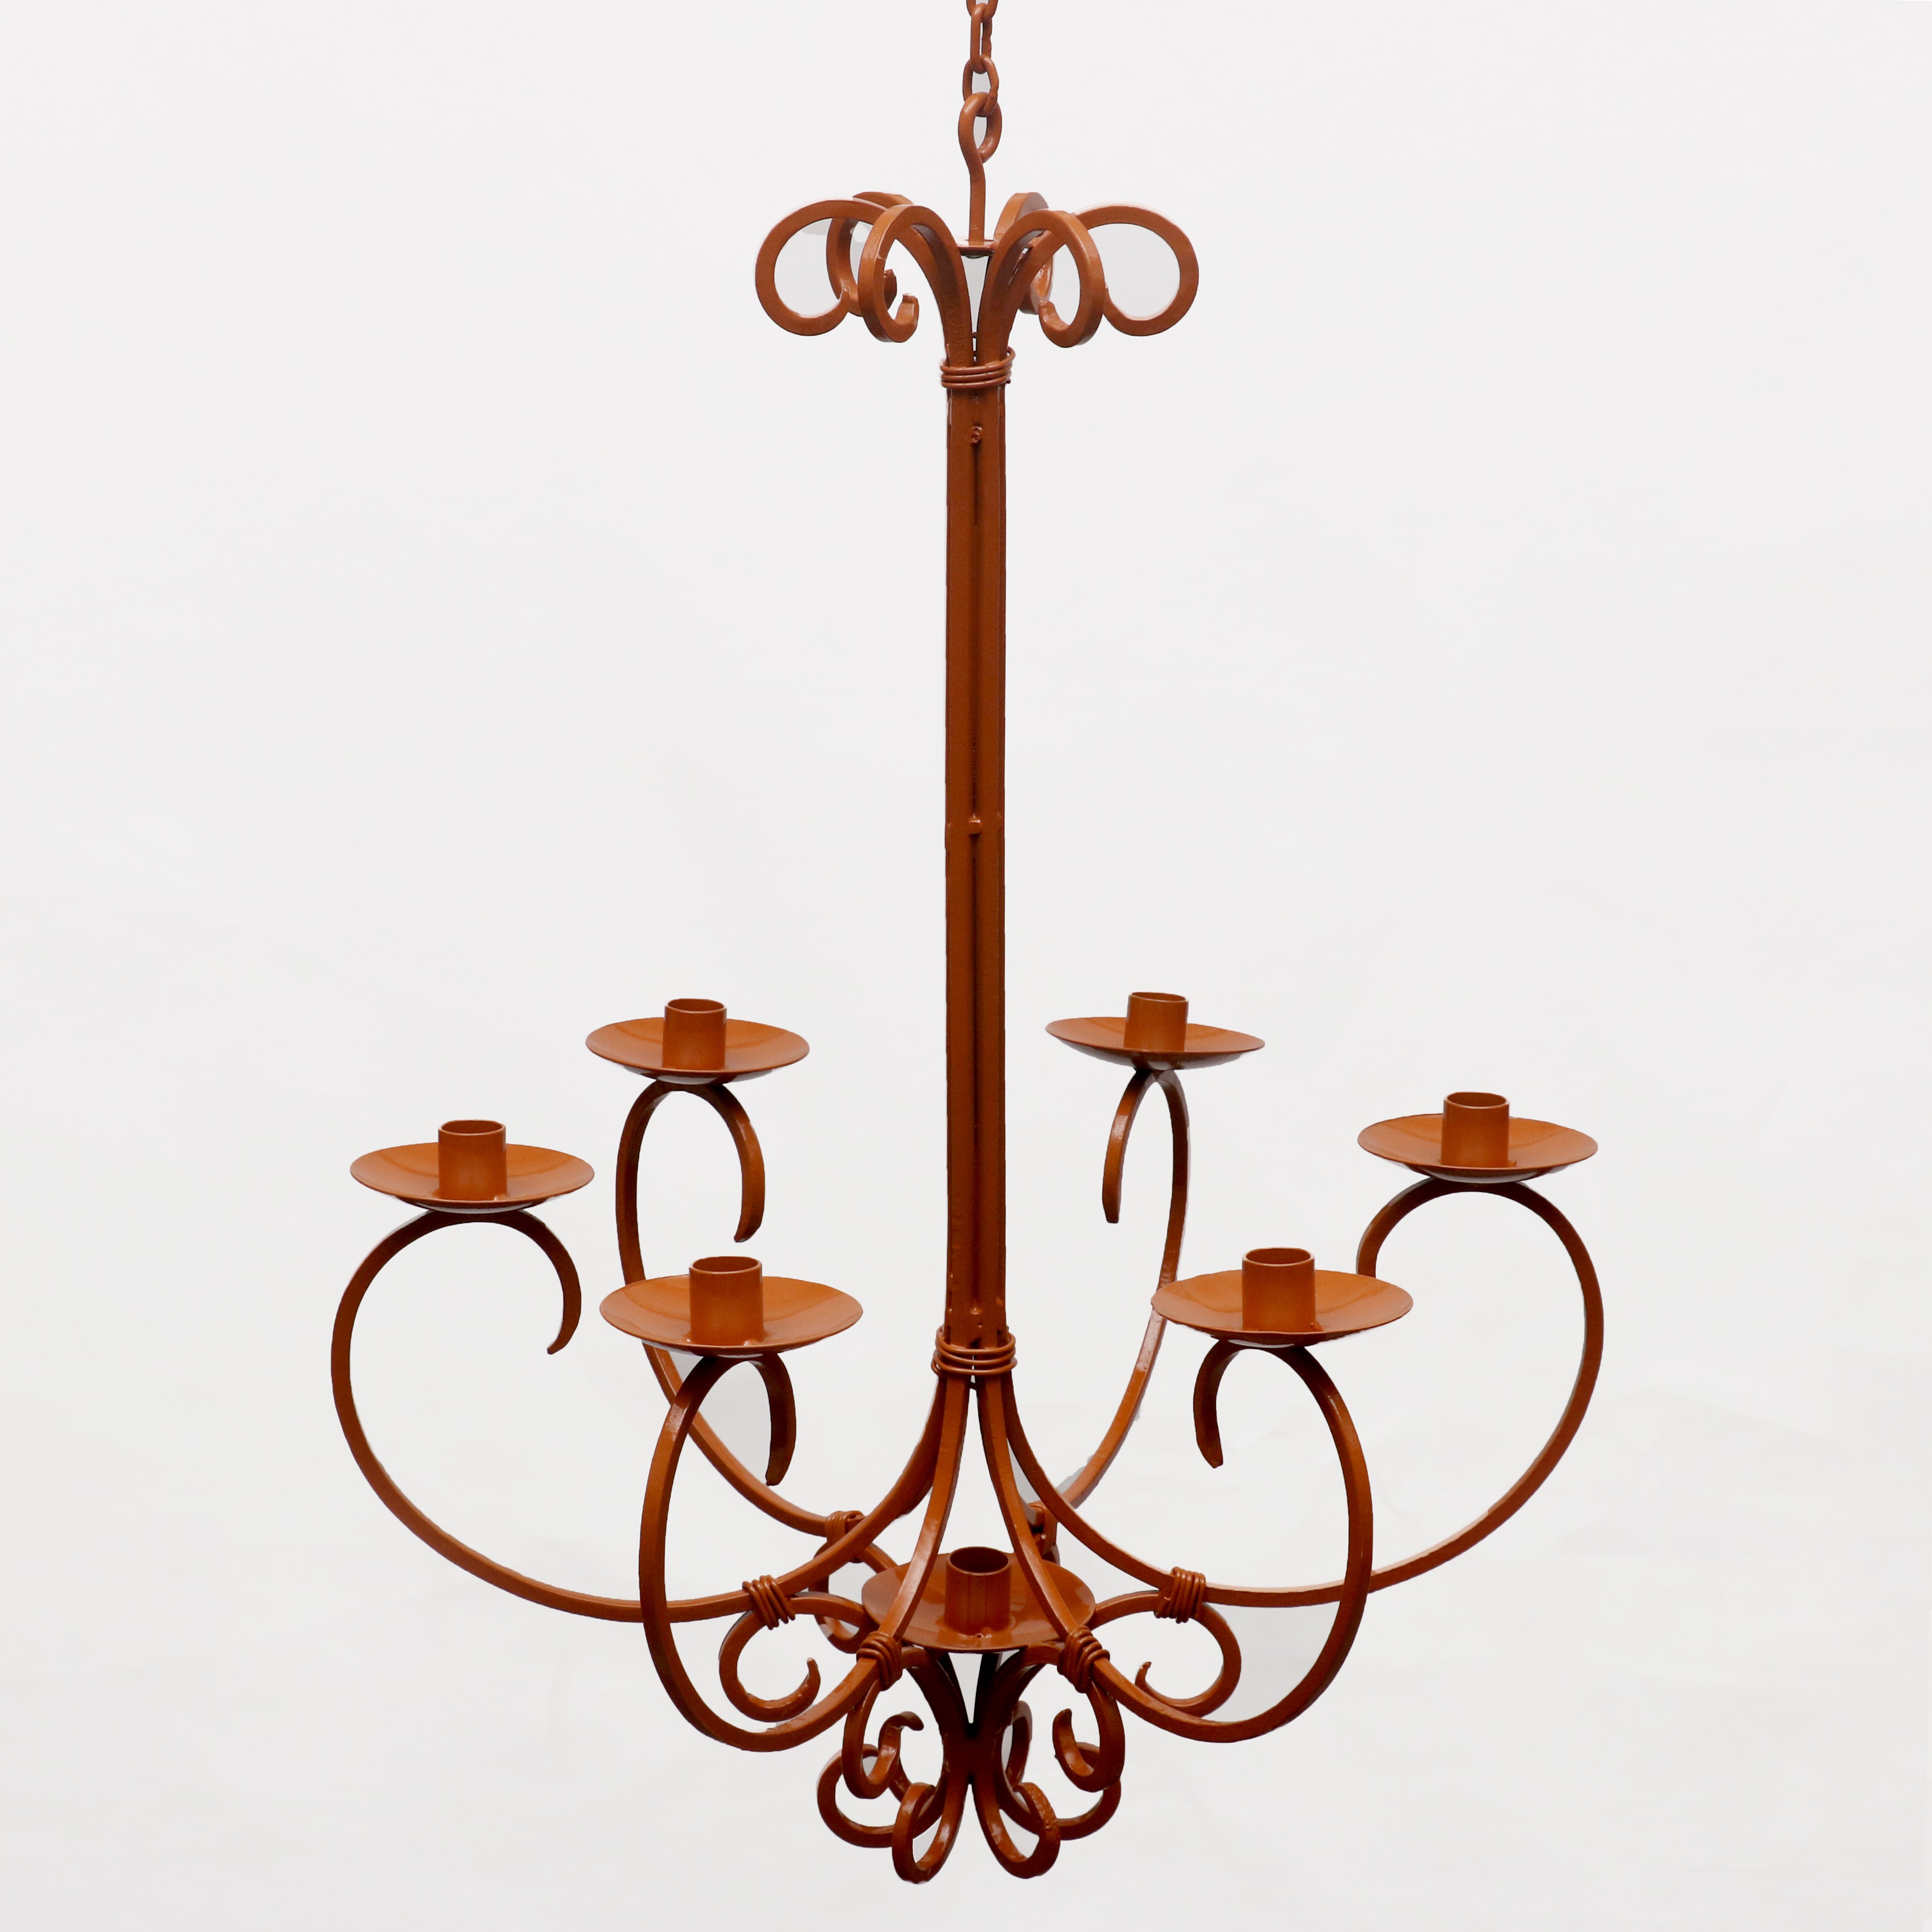 Metal Candle Stand Chandelier Brown Tone Candle Holder